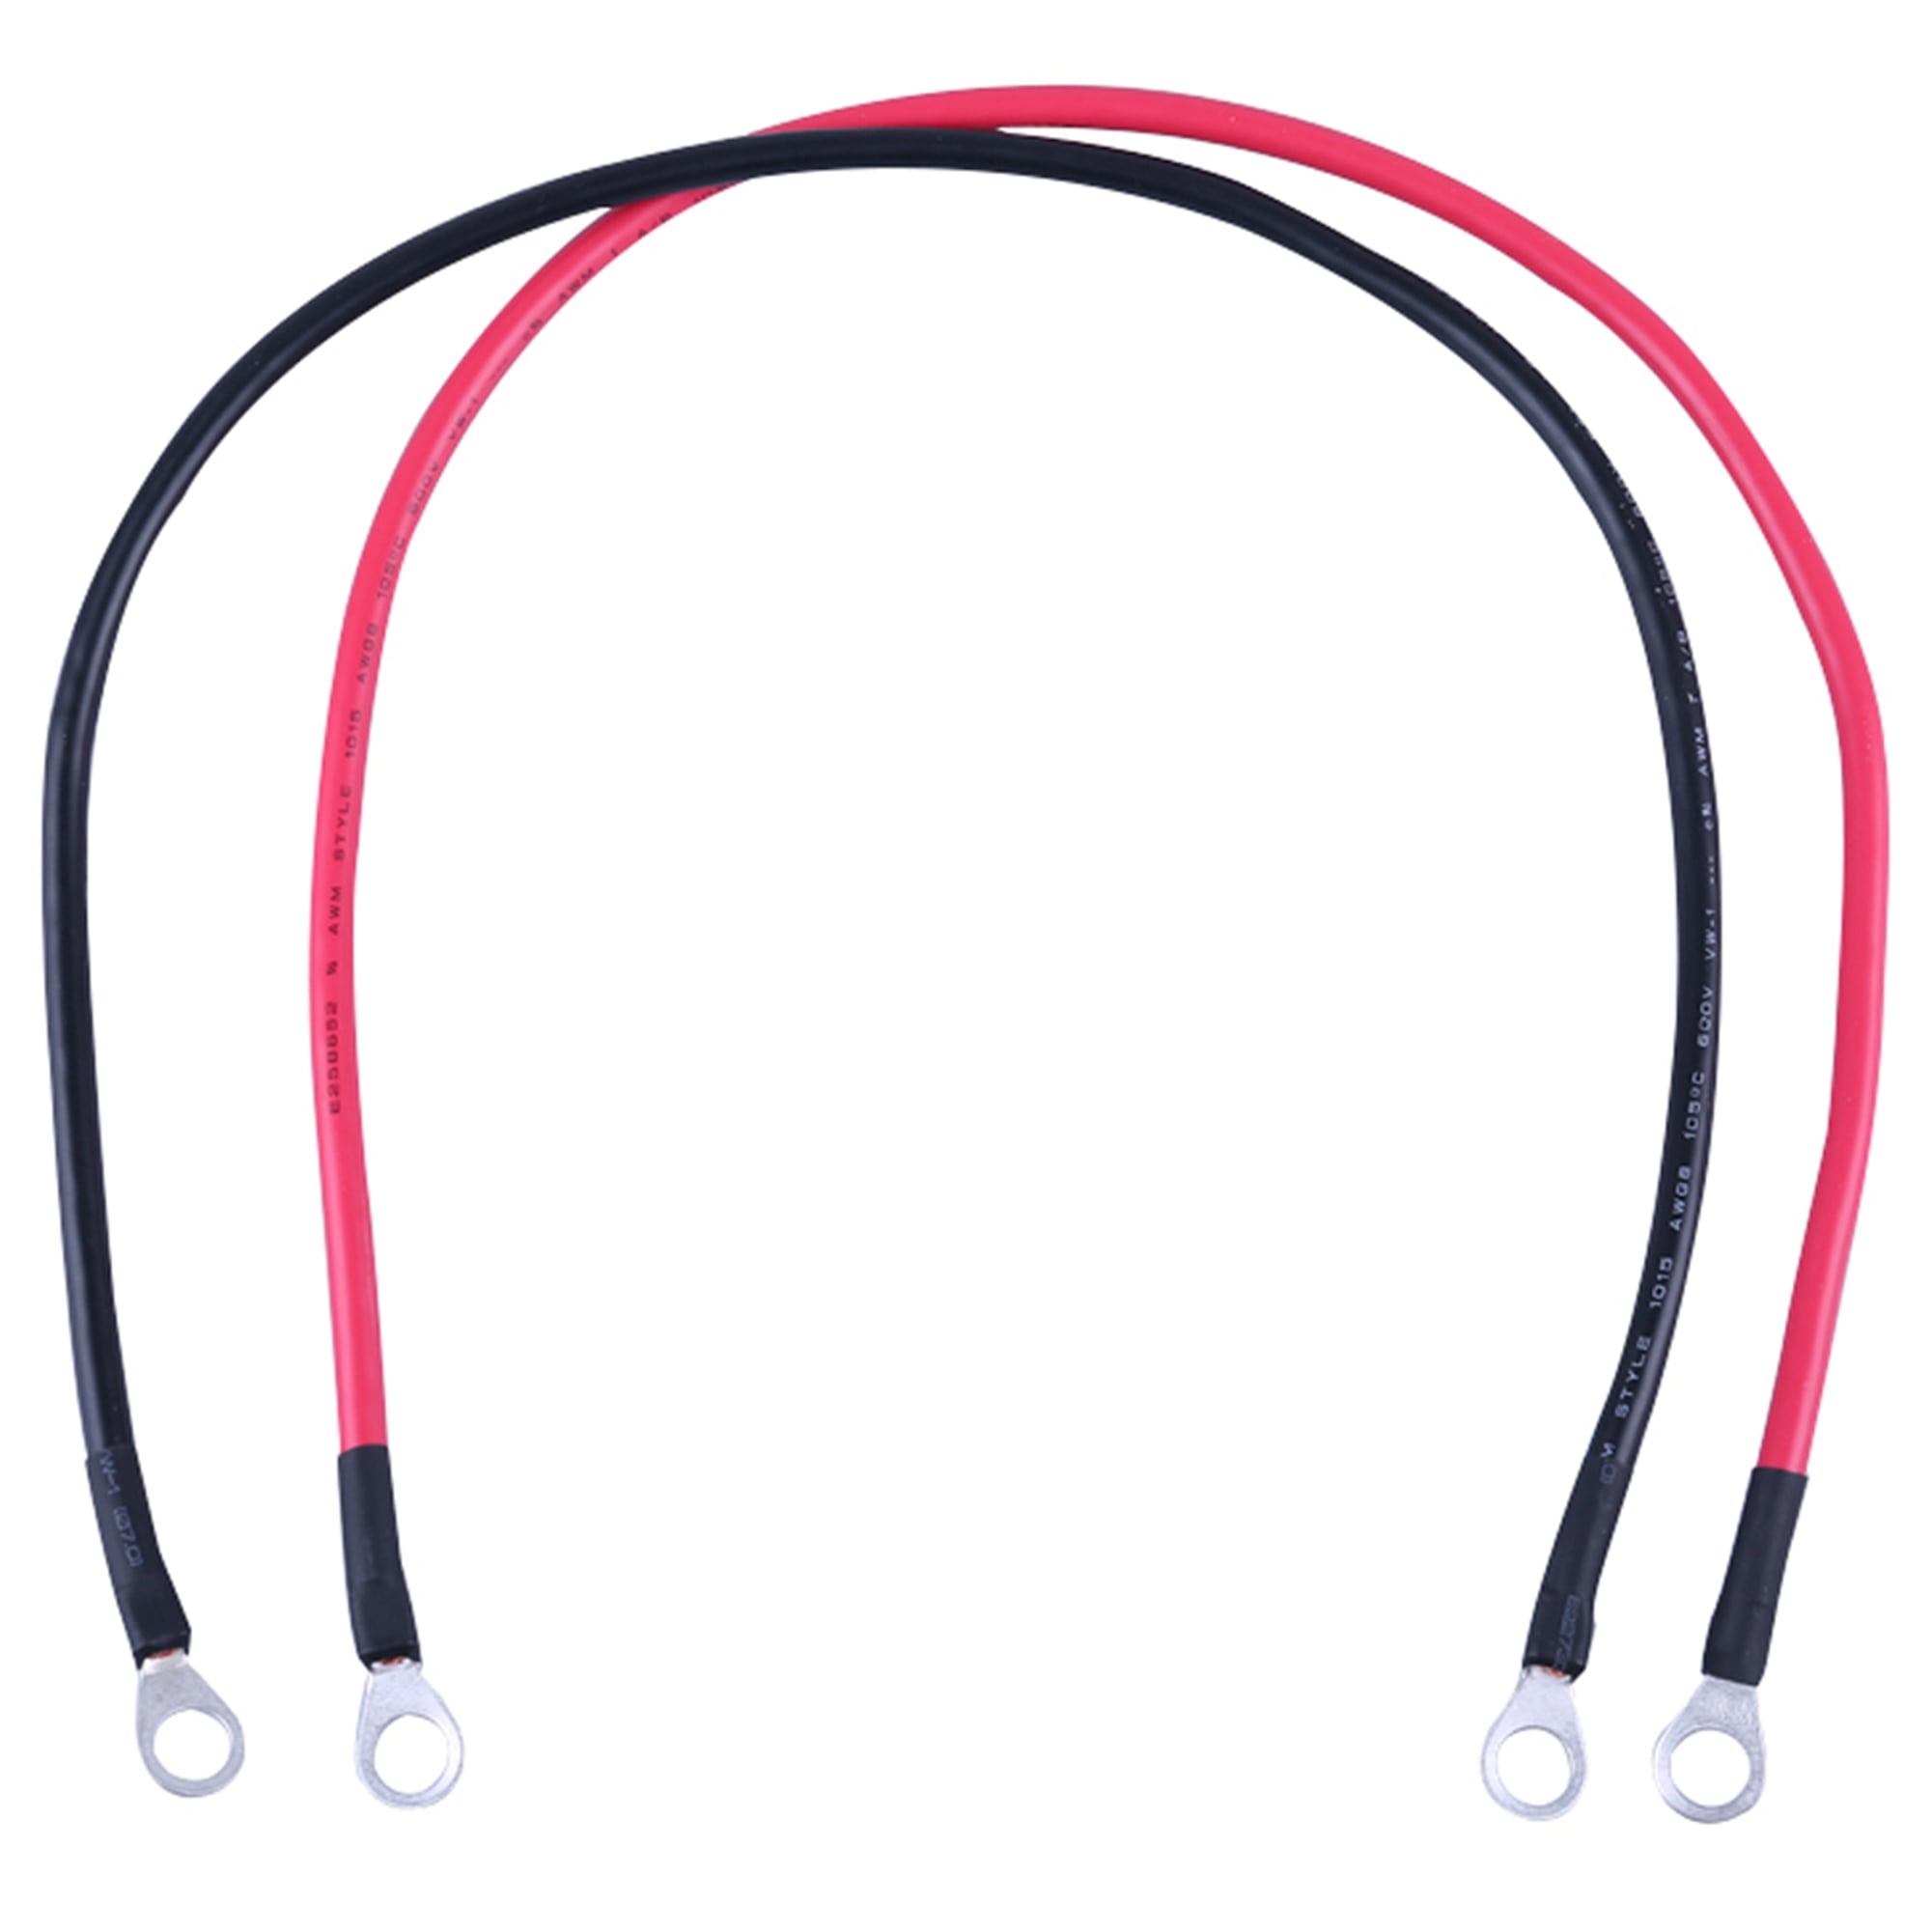 LotFancy 4 AWG Battery Cables, 4 Gauge 24 Inch Power Inverter Cables, 3/8  in Lugs 